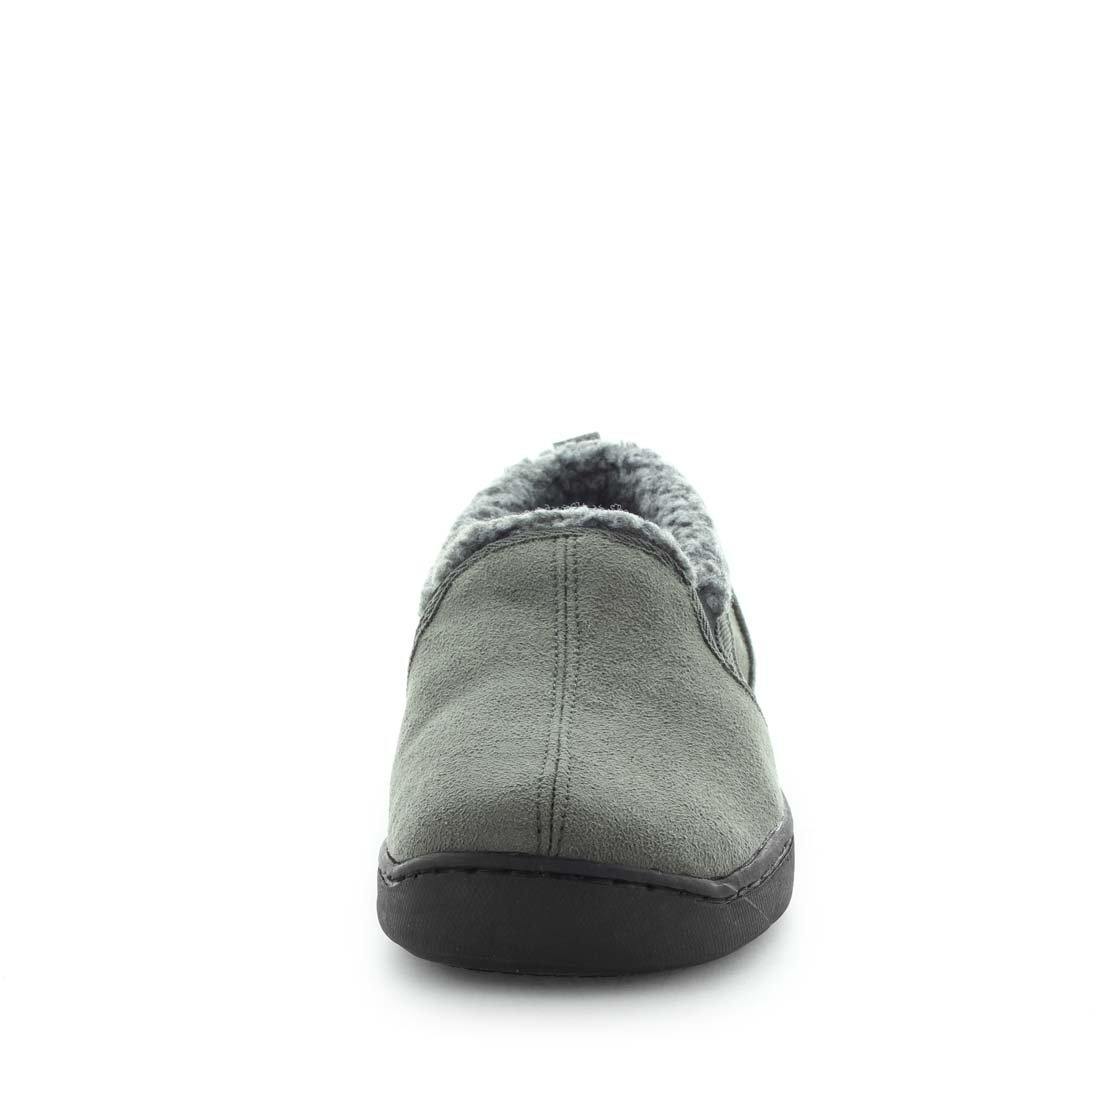 Load image into Gallery viewer, Classic mens slipper, Eliu by panda slippers. A grey/charcoal grey slip on style slipper with soft materials and comfy fit design for indoor wear. Showing a faux fur trimming and a non slip sole.x
